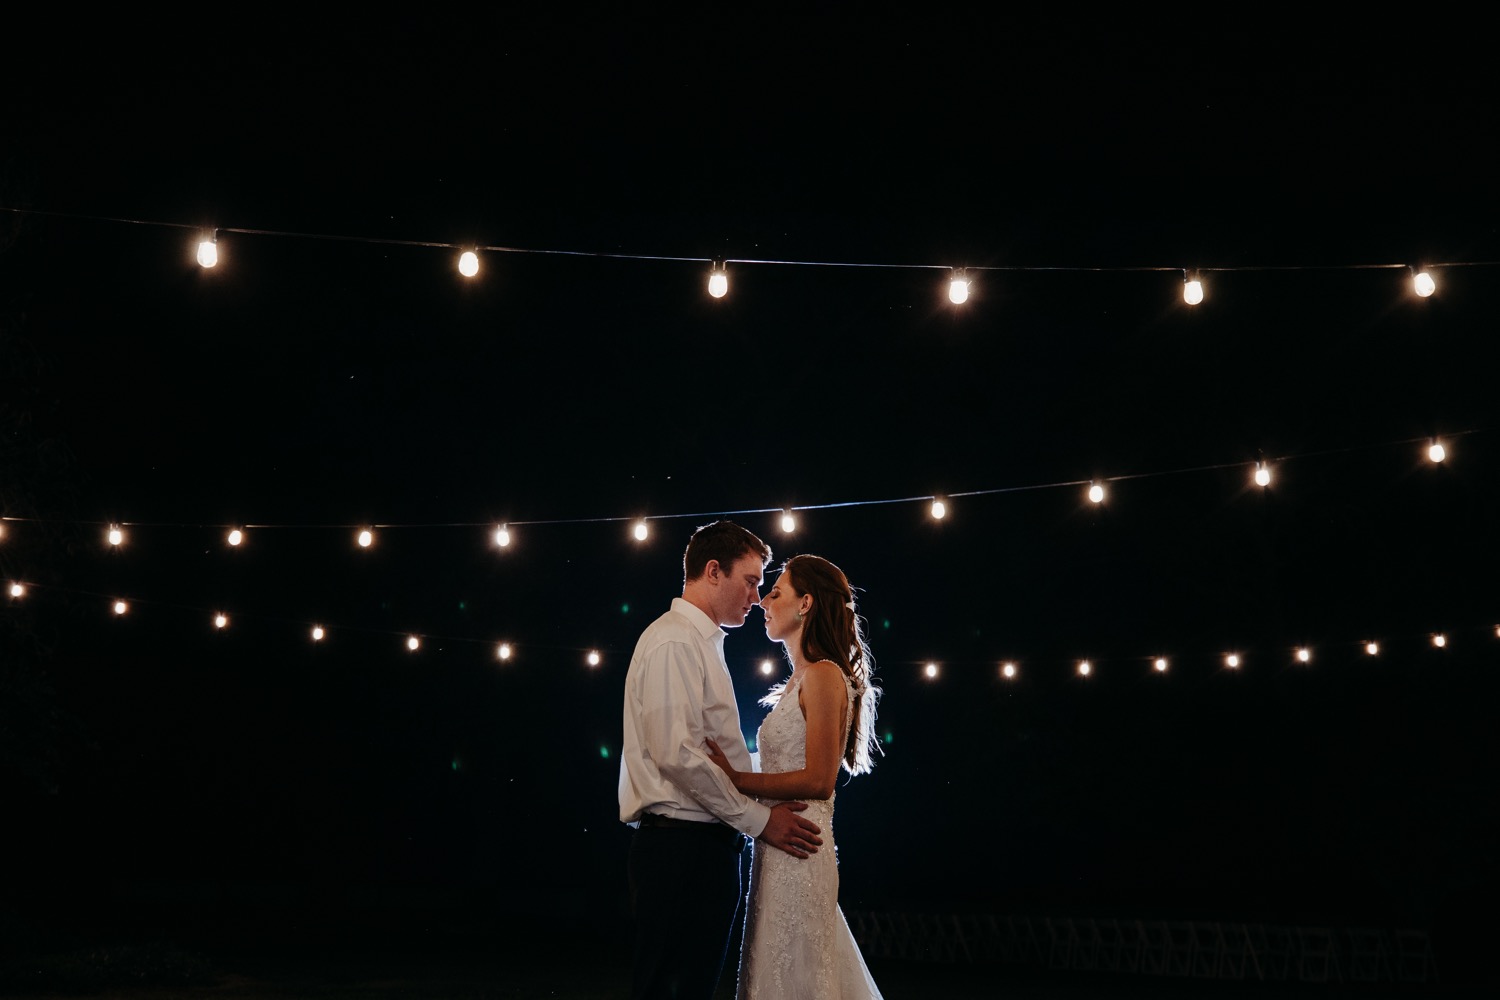 Bride and groom's final dance under the lights. Alayna and Trey's wedding at The Maples in Woodland, CA.